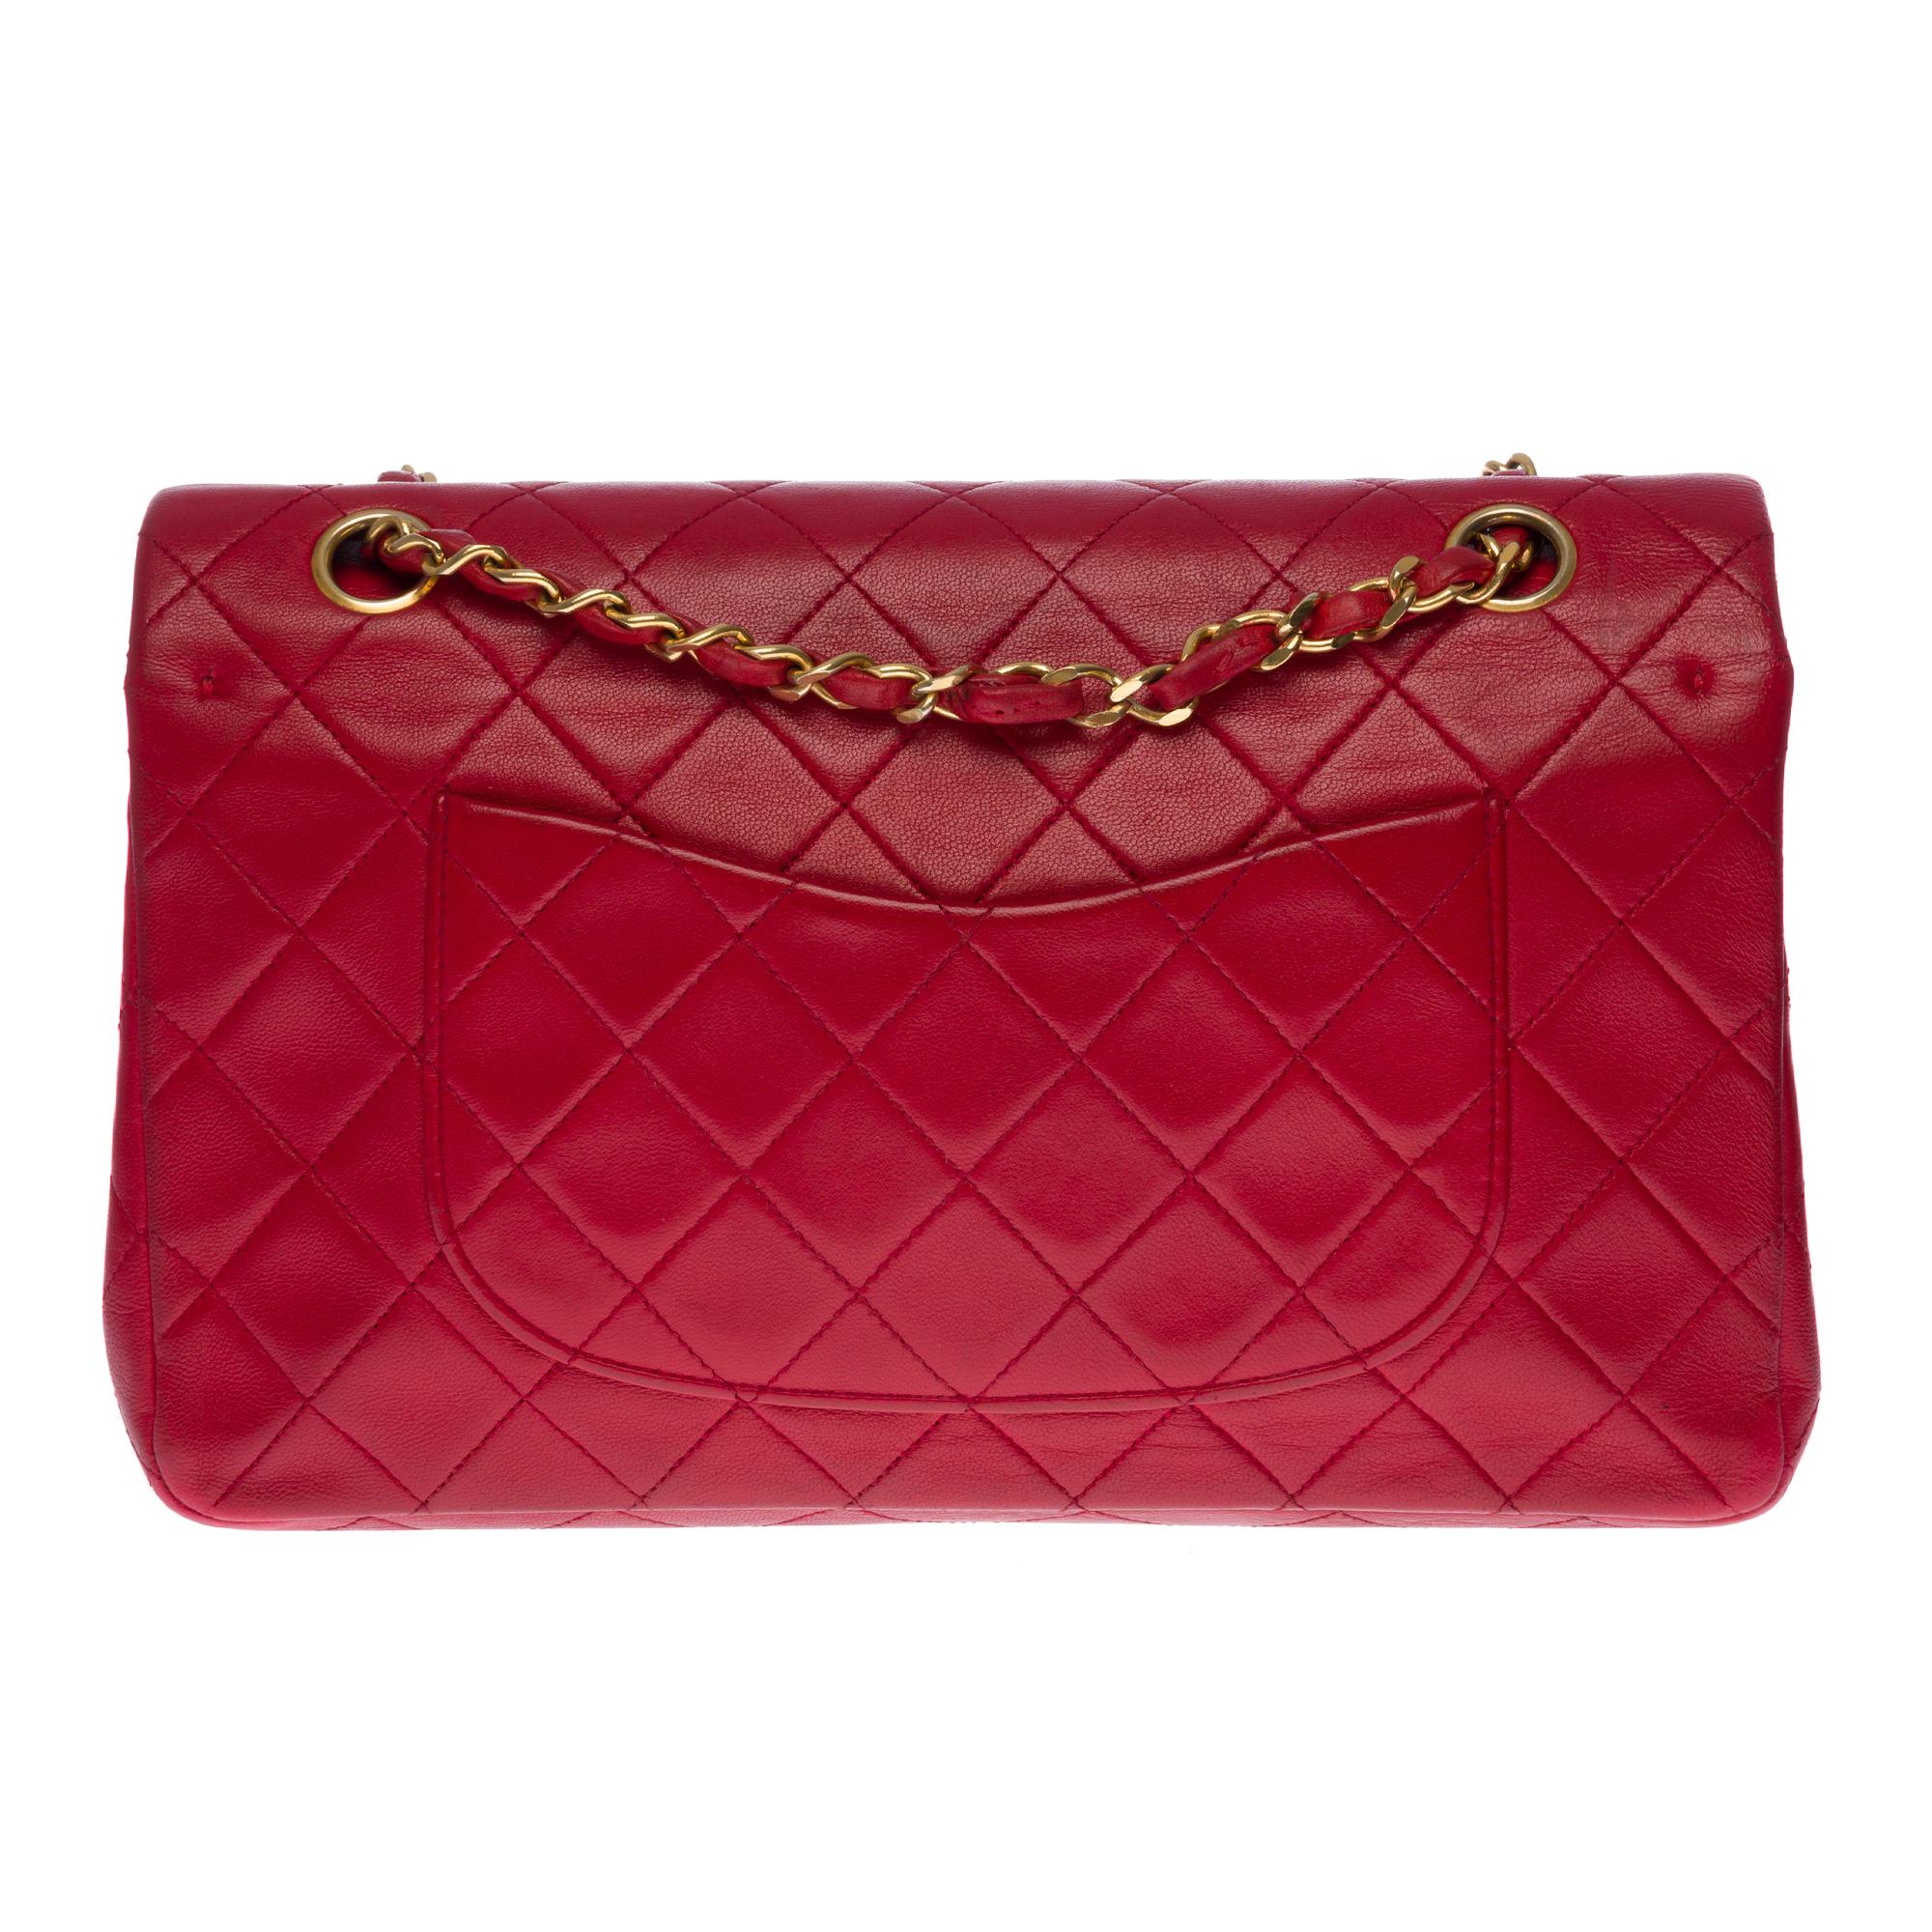 Gorgeous Chanel Timeless Medium Bag with double flap in bright red quilted lambskin leather, gold-tone metal hardware, gold-tone metal chain intertwined with red leather for shoulder support.
Pocket on the back of the bag.
Flap closure, gold-tone CC